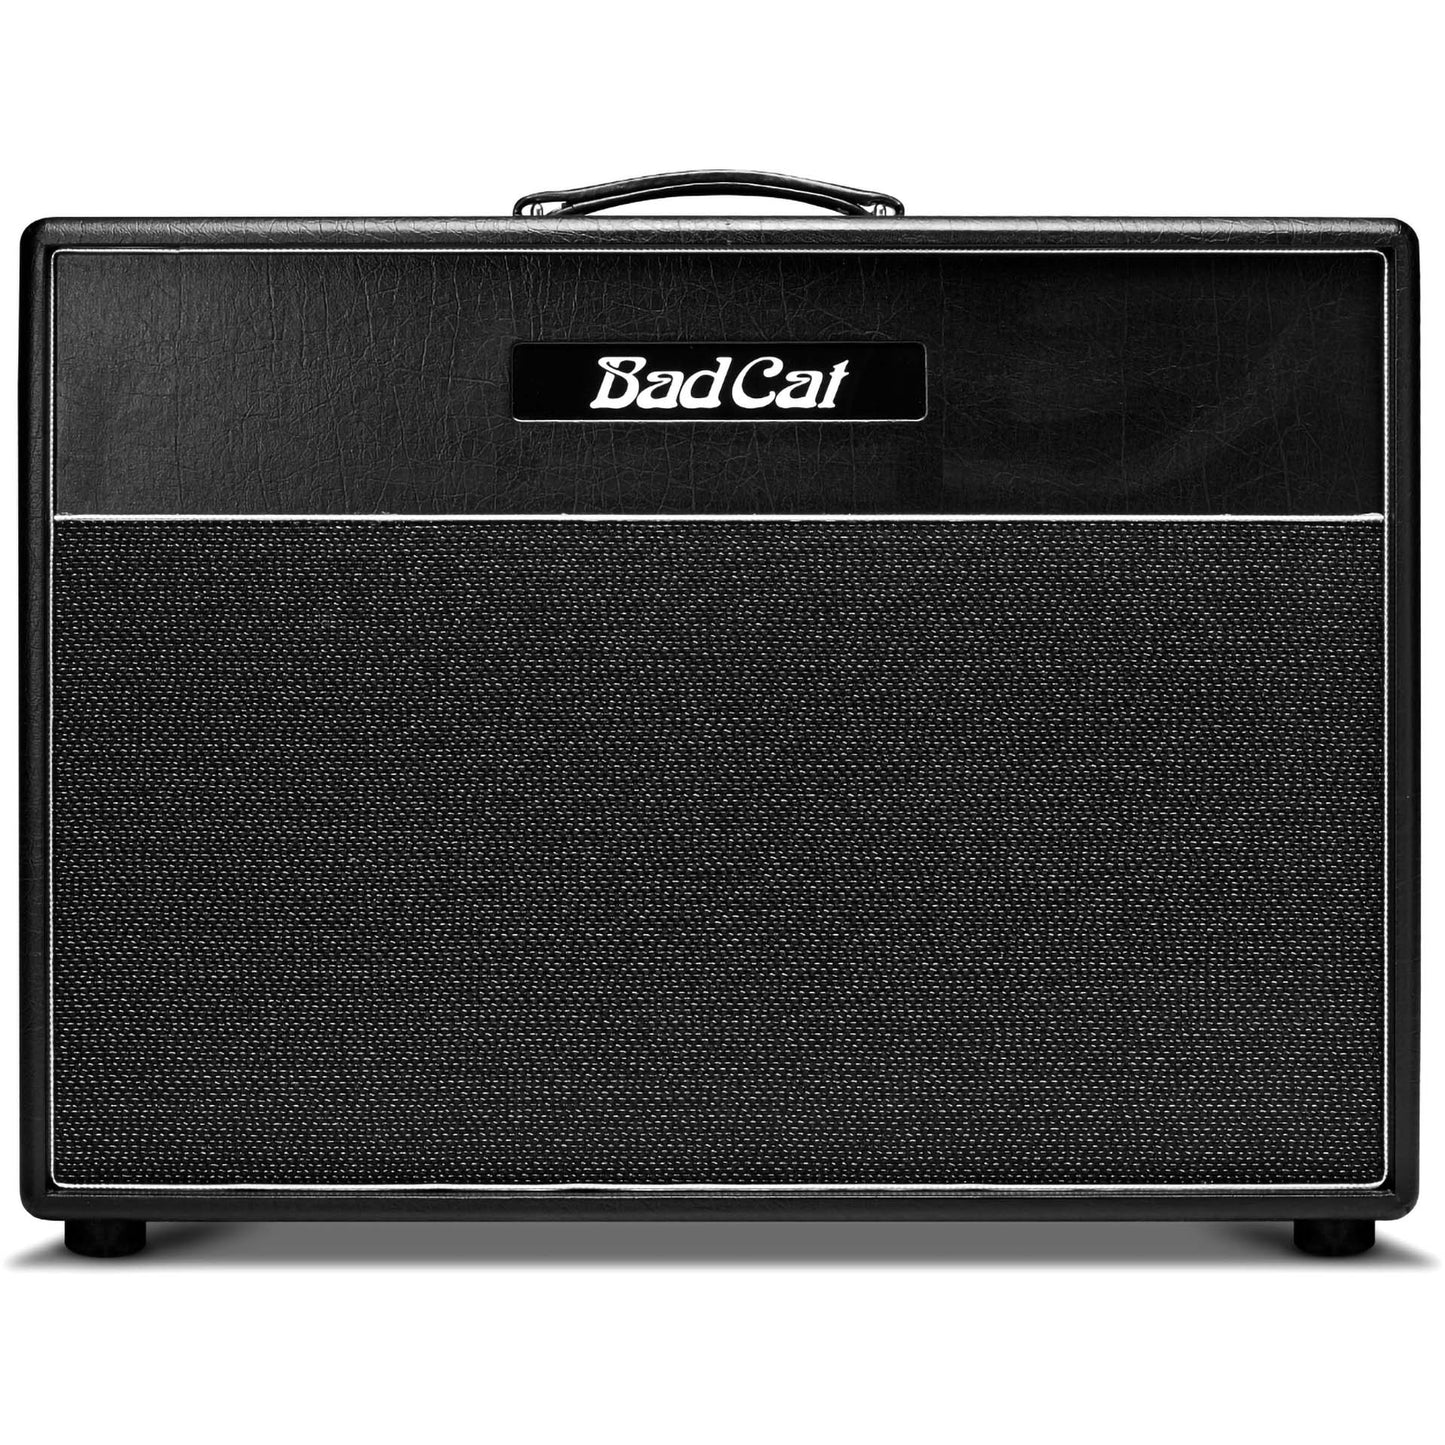 Bad Cat Amplifiers Hot Cat 2x12 Extension Cabinet